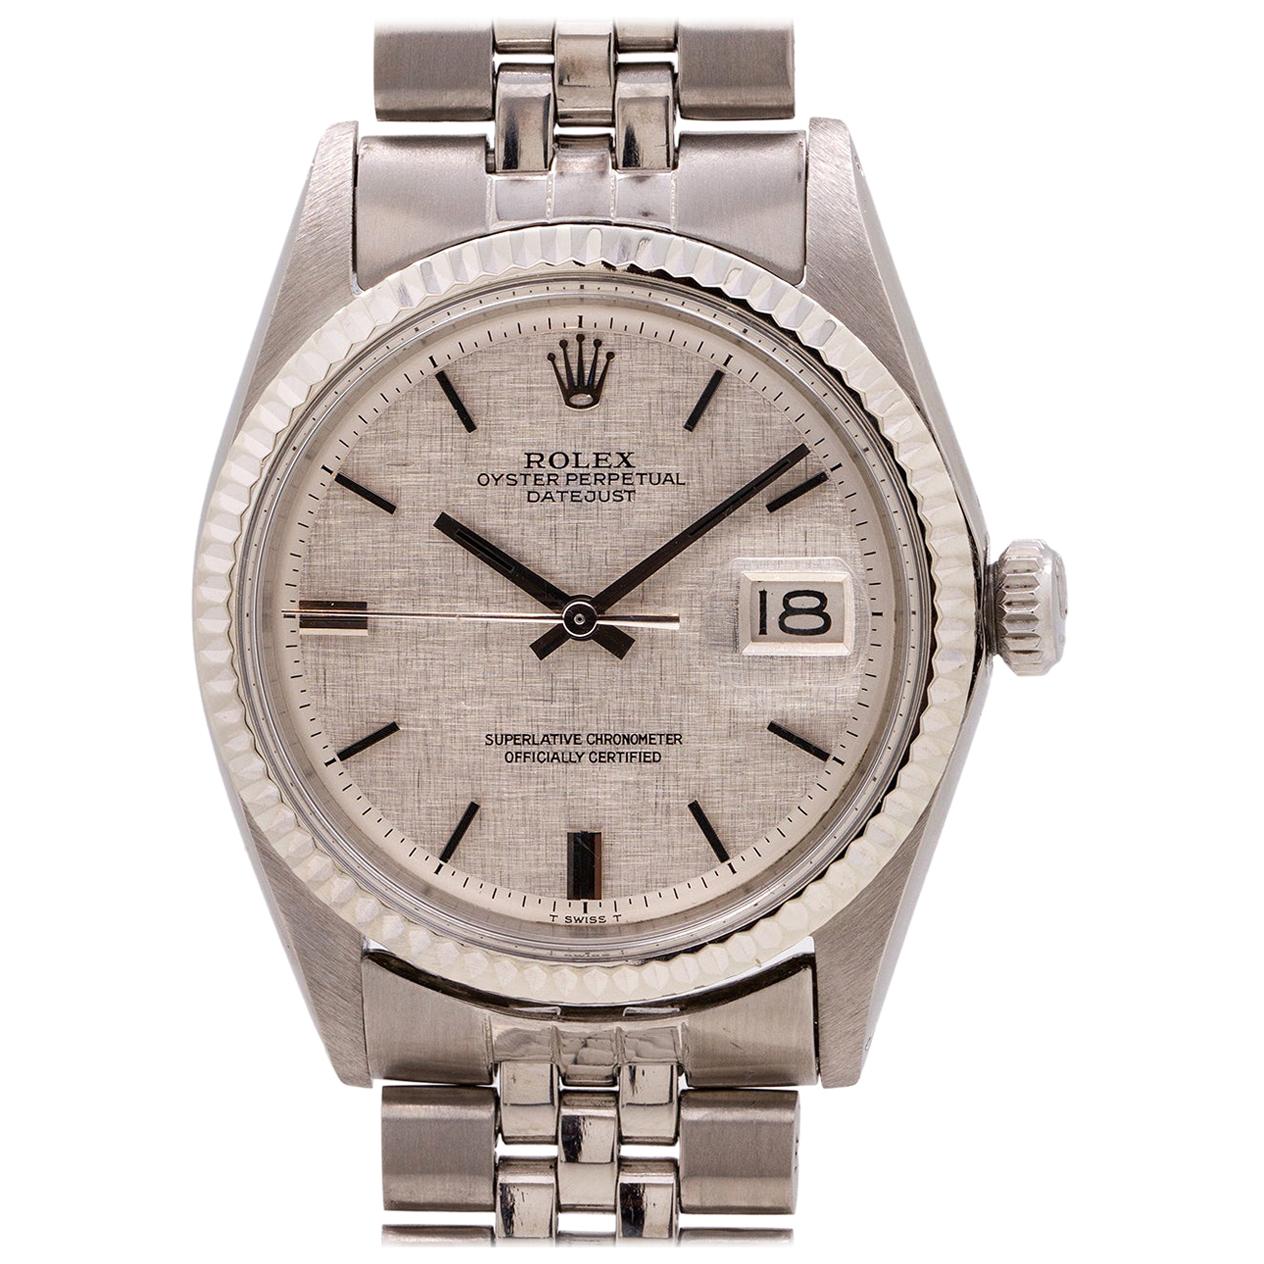 Rolex Datejust Stainless and 14 Karat White Gold with Linen Dial Ref 1601 For Sale